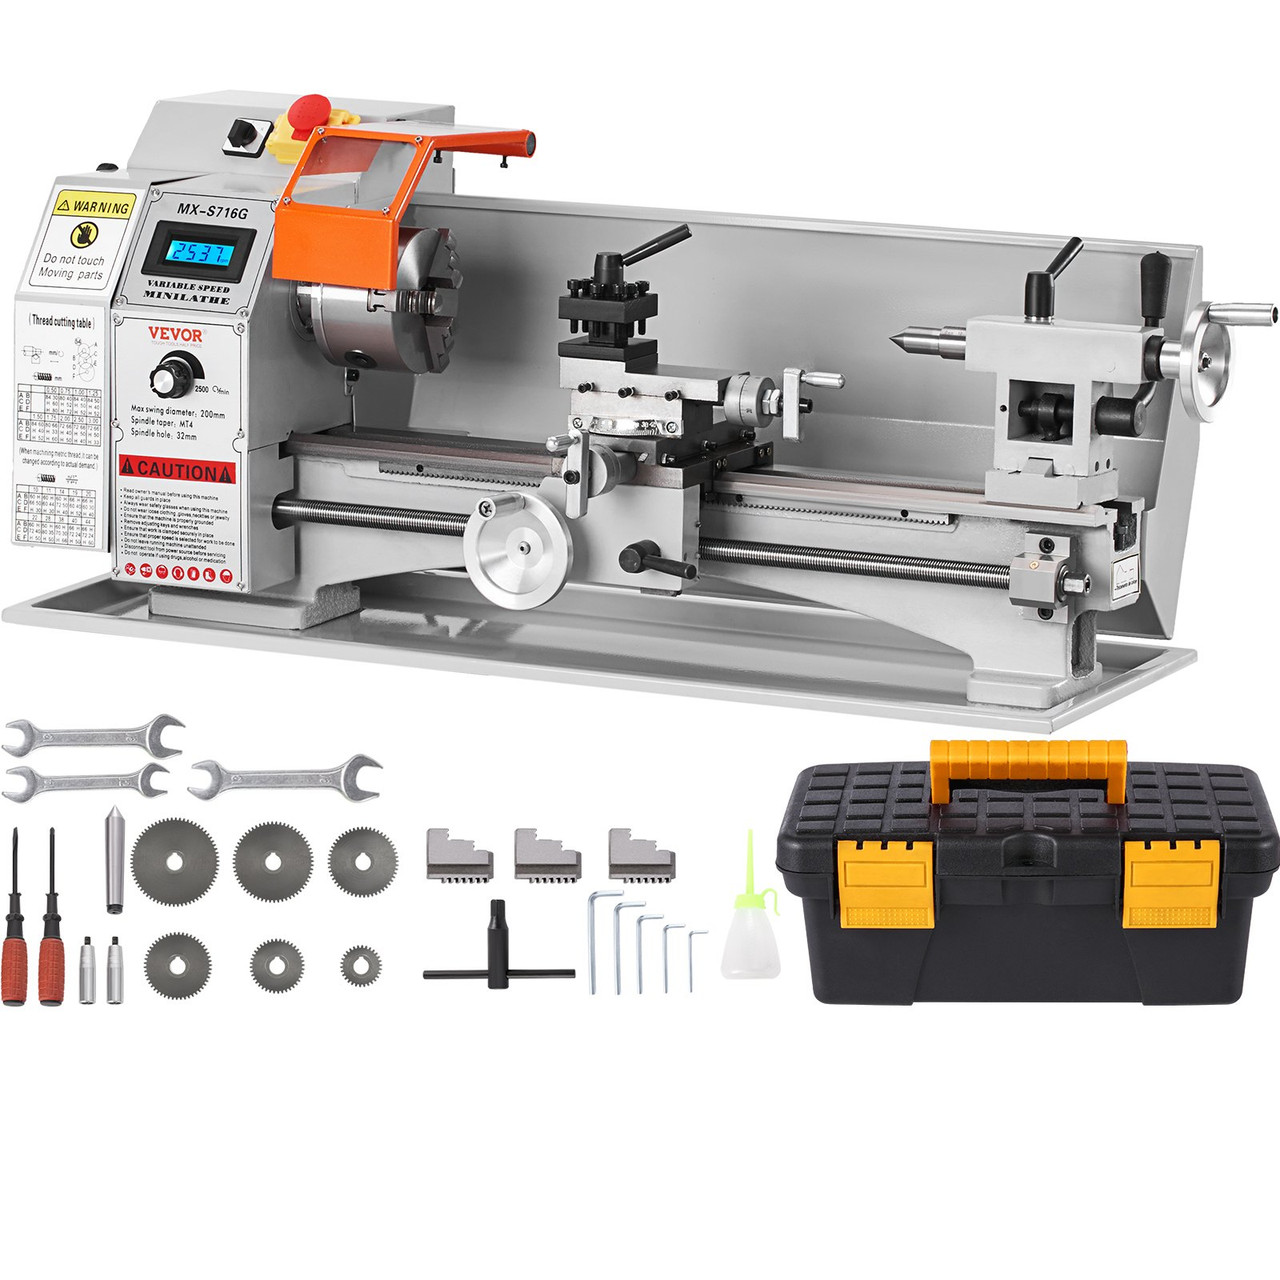 Mini Metal Lathe Machine, 7'' x 16'', 800W Precision Benchtop Power Metal Lathe, 150-2500 RPM Continuously Variable Speed, with 3.9'' 3-jaw Metal Chuck Tool Box for Processing Precision Parts